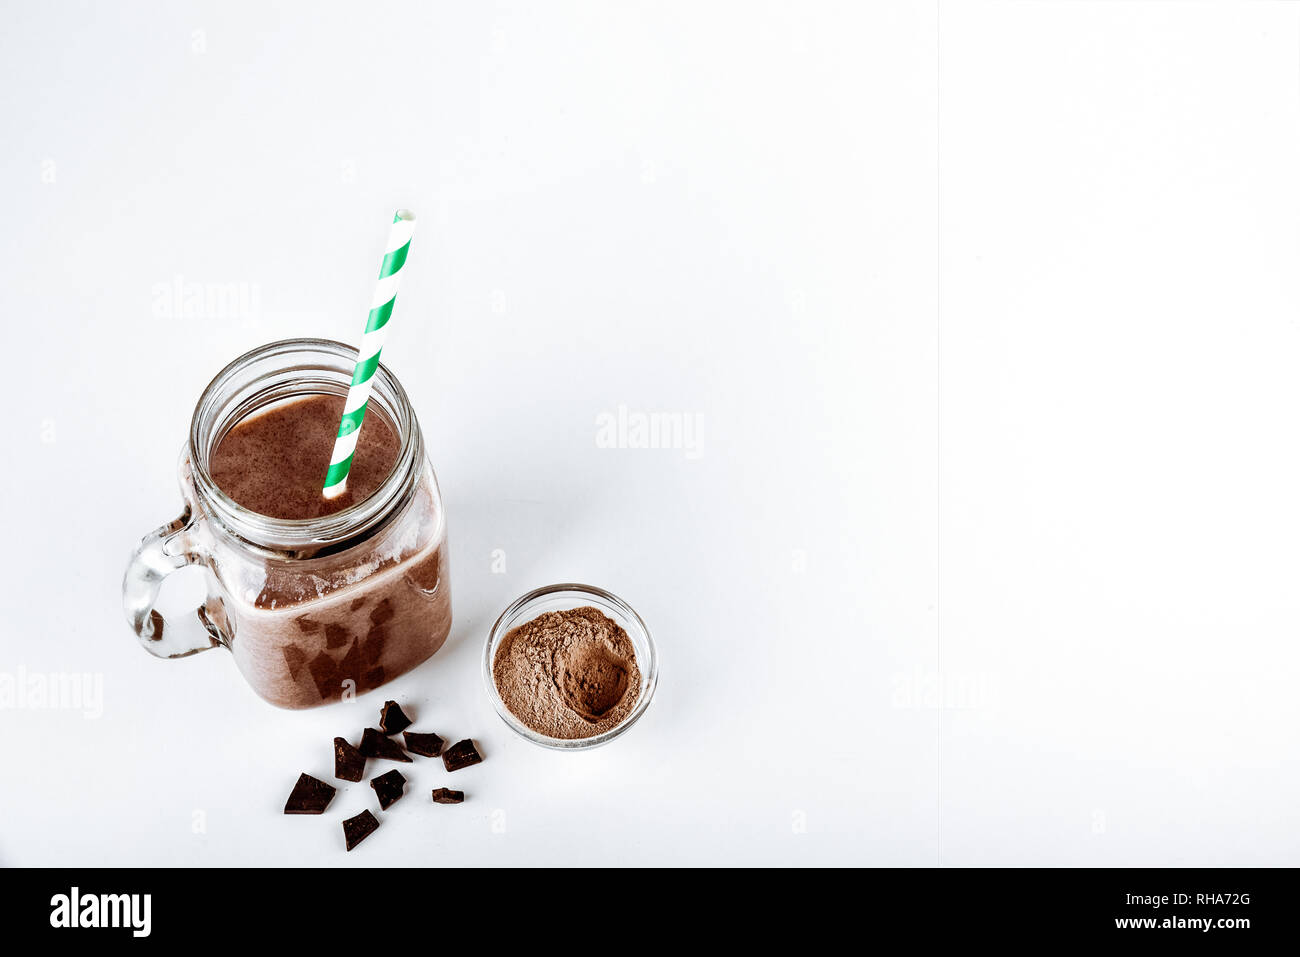 A glass of protein with cocoa and powder on a white background Stock Photo